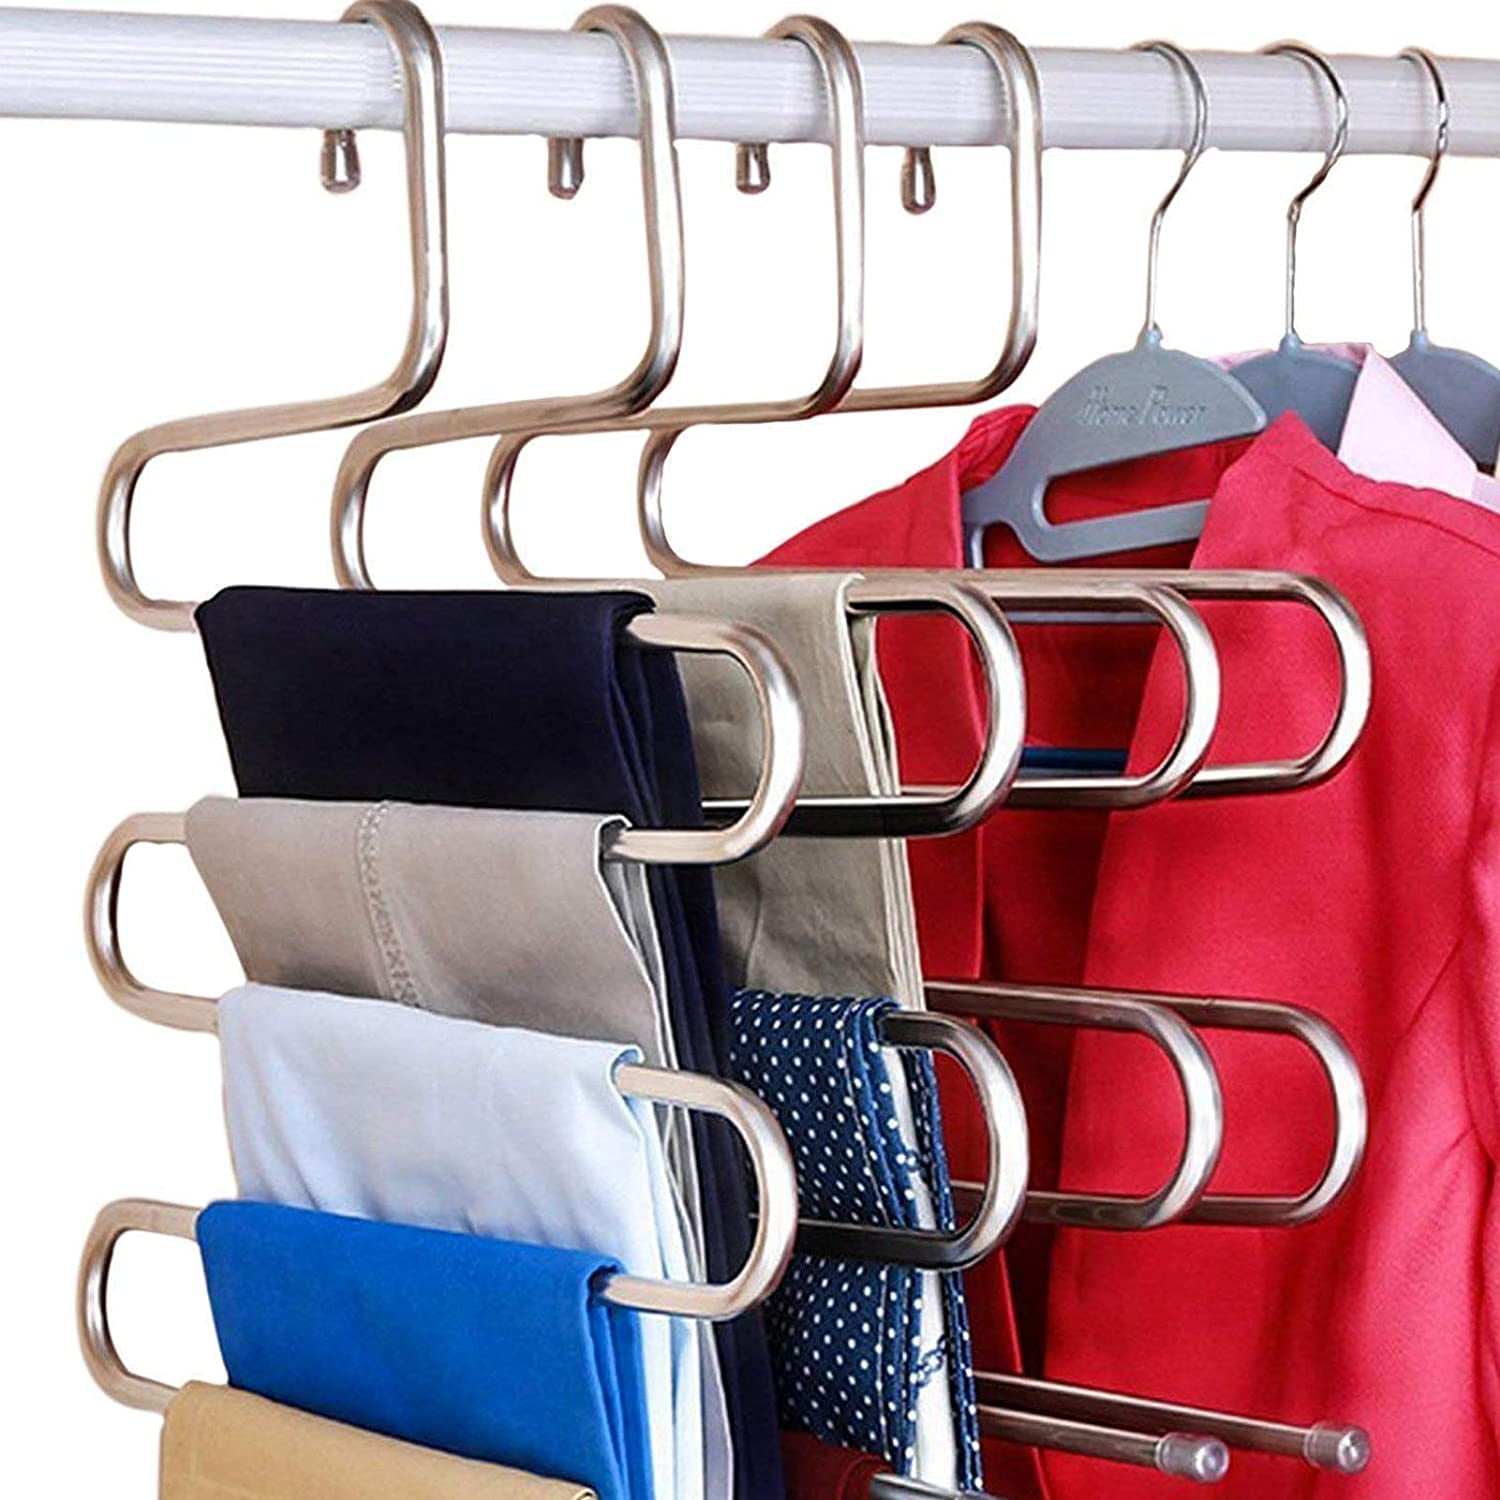 Black, 1 Pack CEISPOB Pants Hangers S-Type Clothes Jeans Hanger Newest Version Closet Storage Organizer for Pants Jeans Trousers Scarf Hanging Space Saving Magic Hangers 